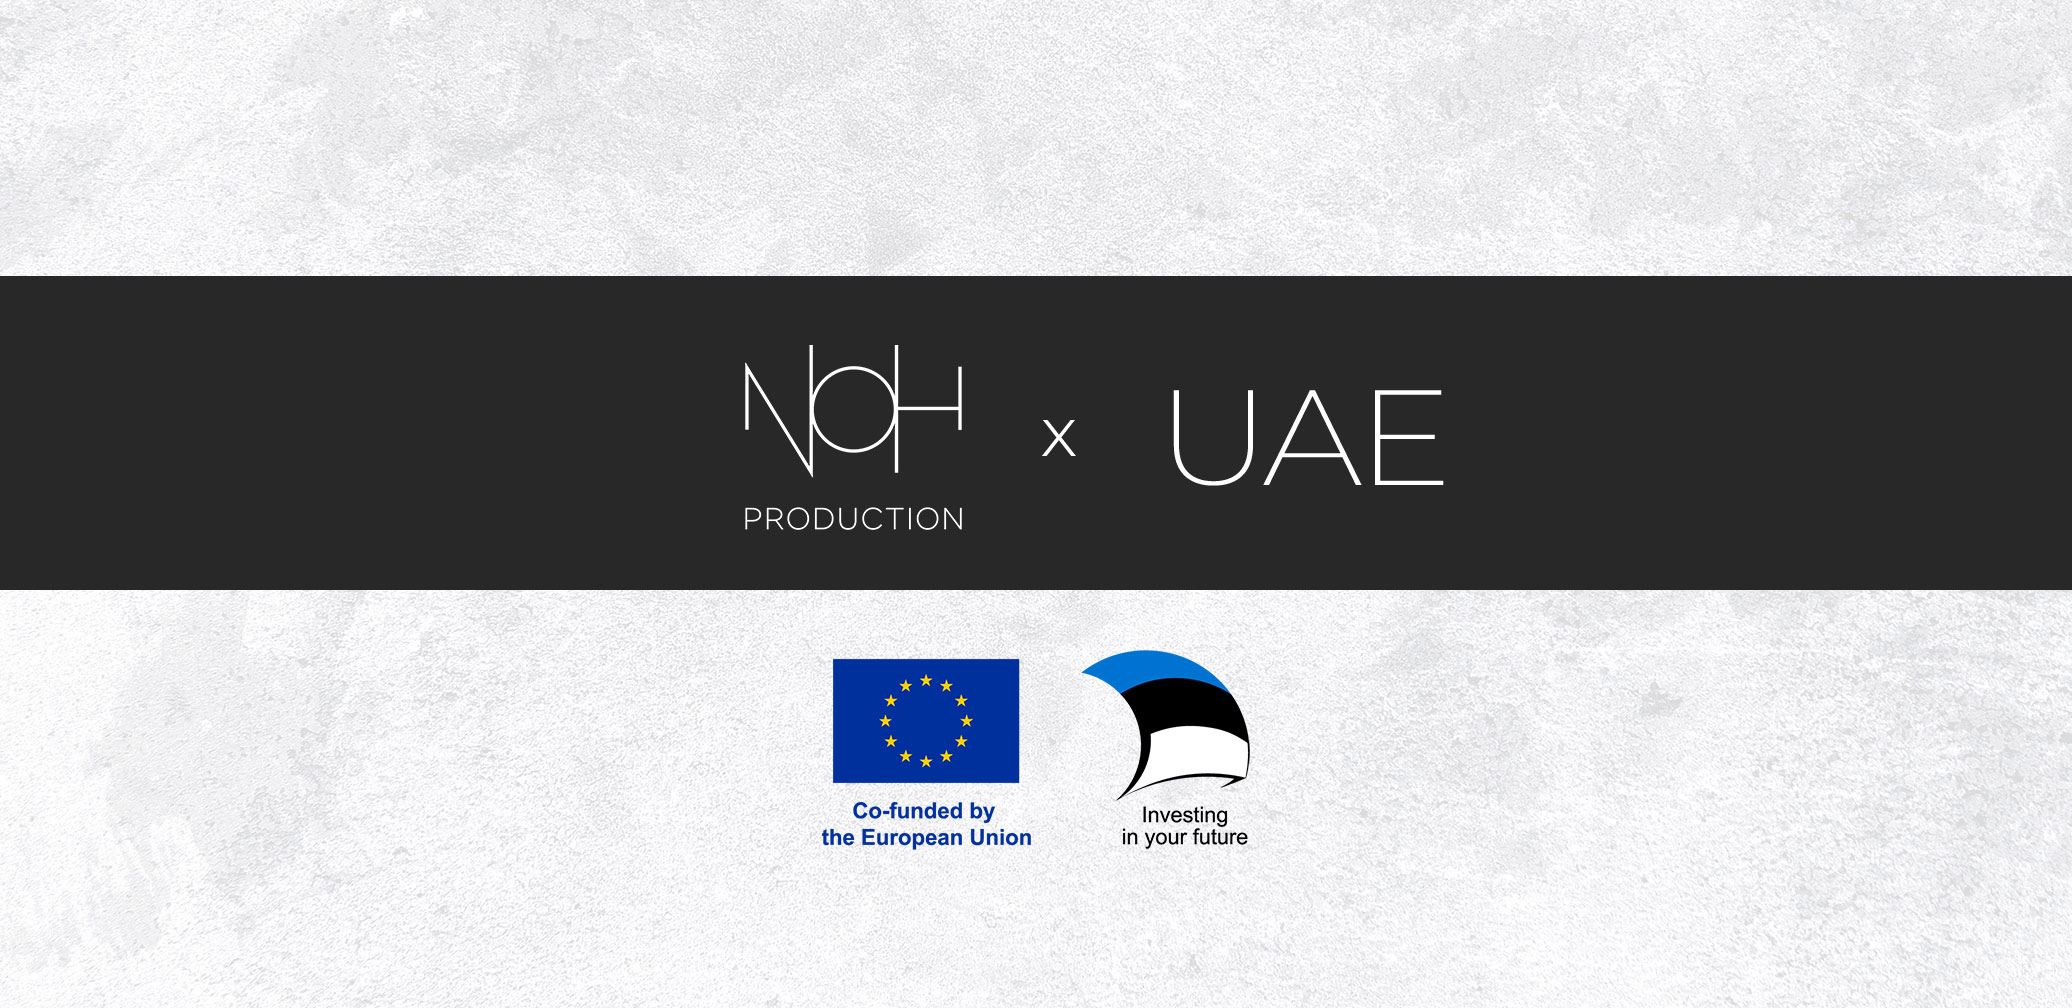 The Entrepreneurship and Innovation Foundation (EIS) supports NOH Production’s ambition to expand into the UAE market.